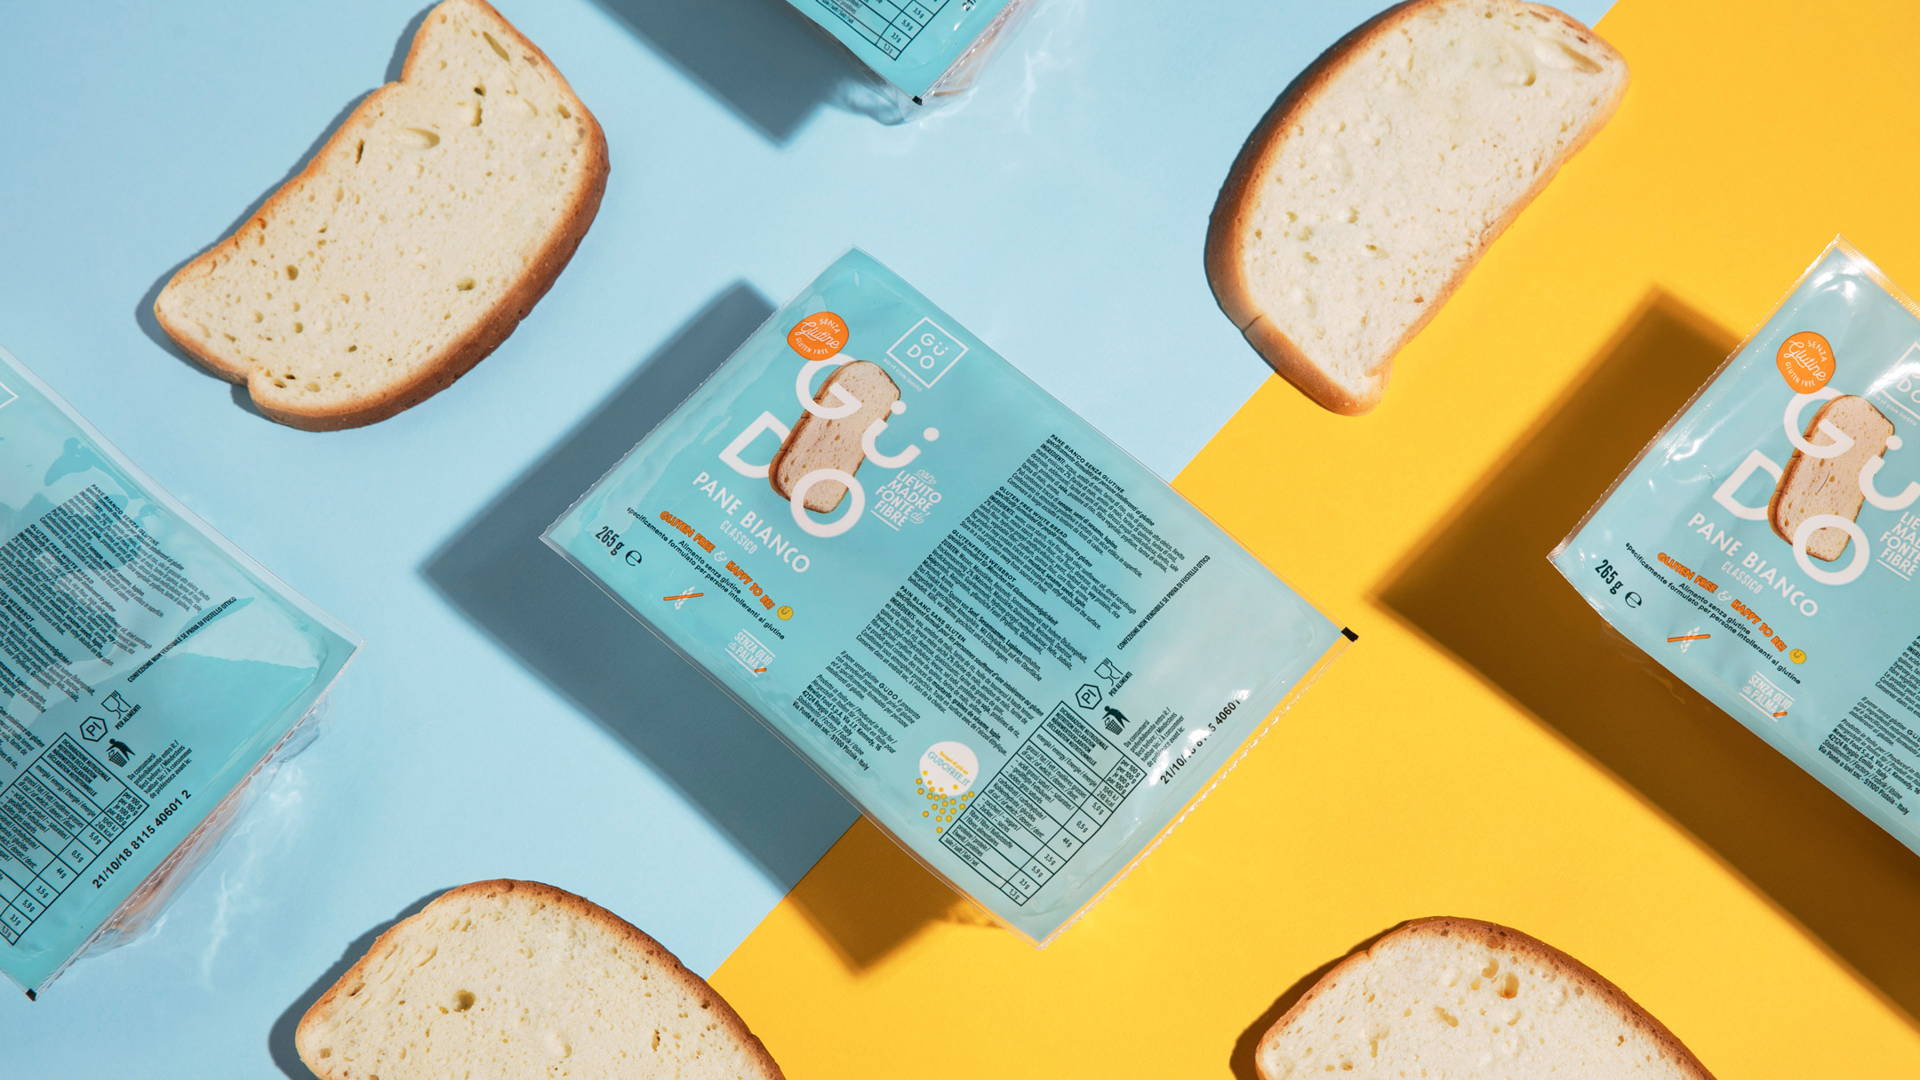 Featured image for GÜDO Wants To Celebrate The Gluten-Free Lifestyle With Cheery Packaging